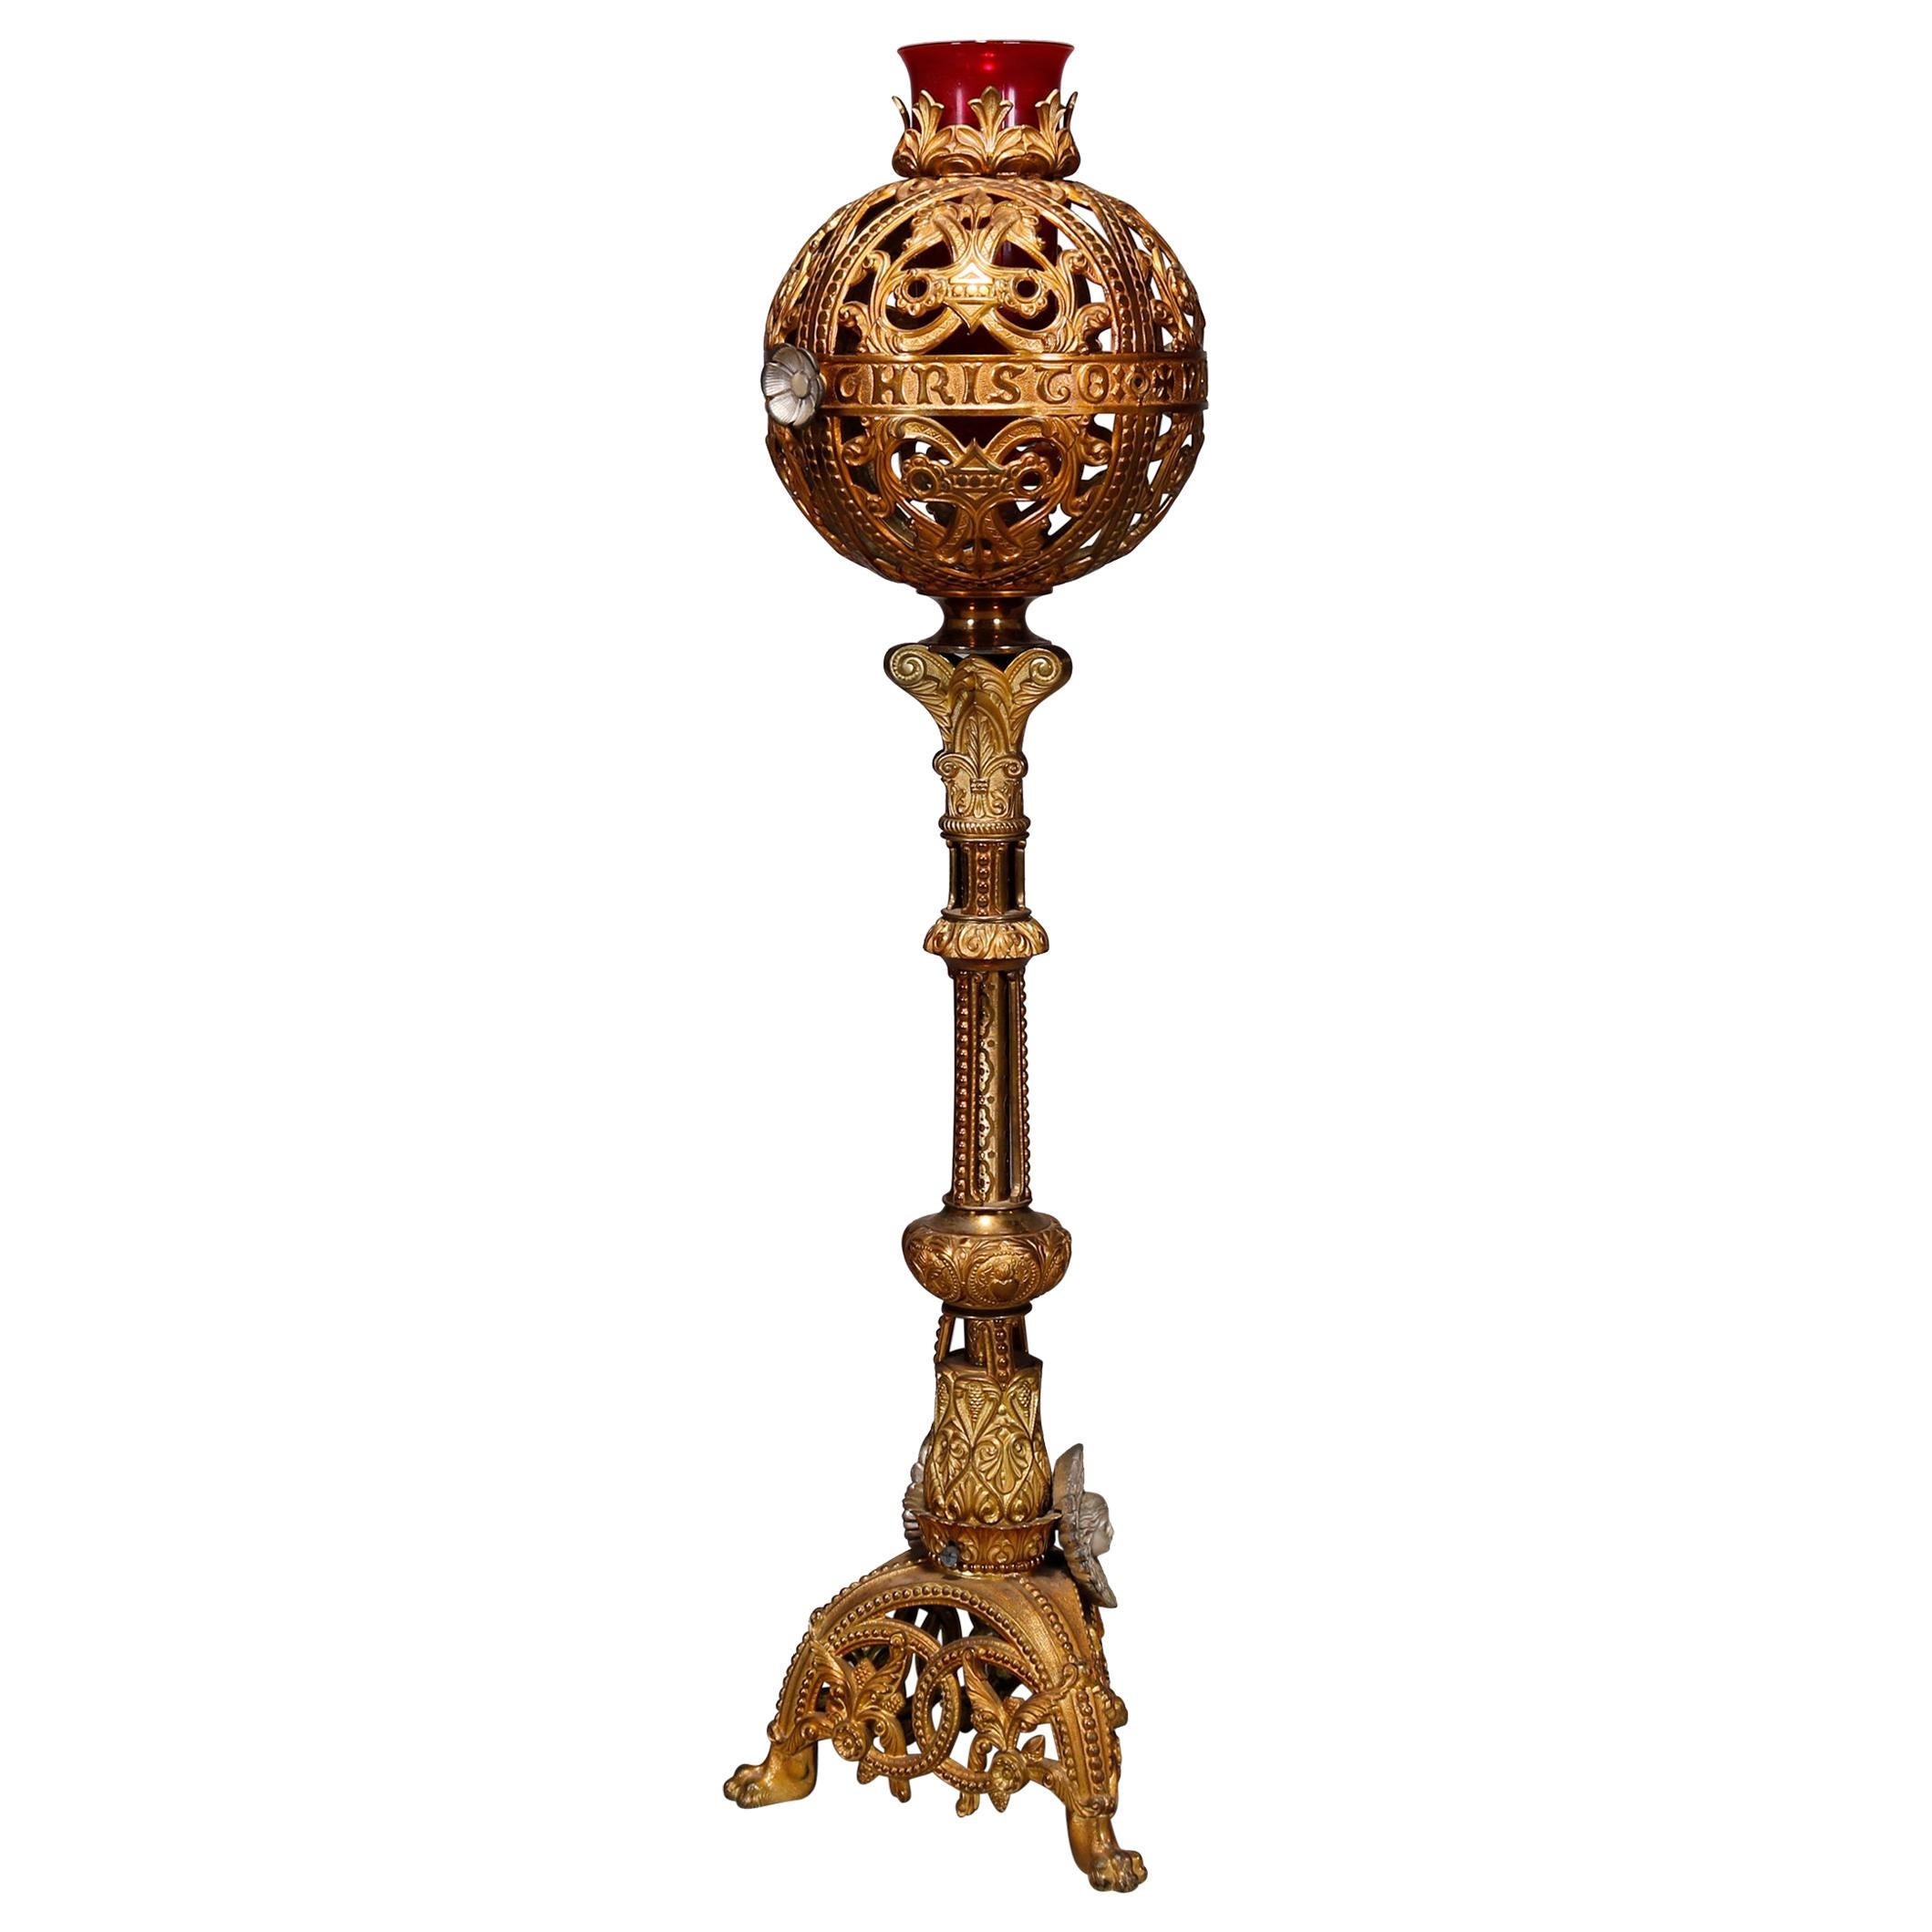 Antique Gothic Gilt Bronze and Glass Figural Monstrance Candelabra, 19th Century